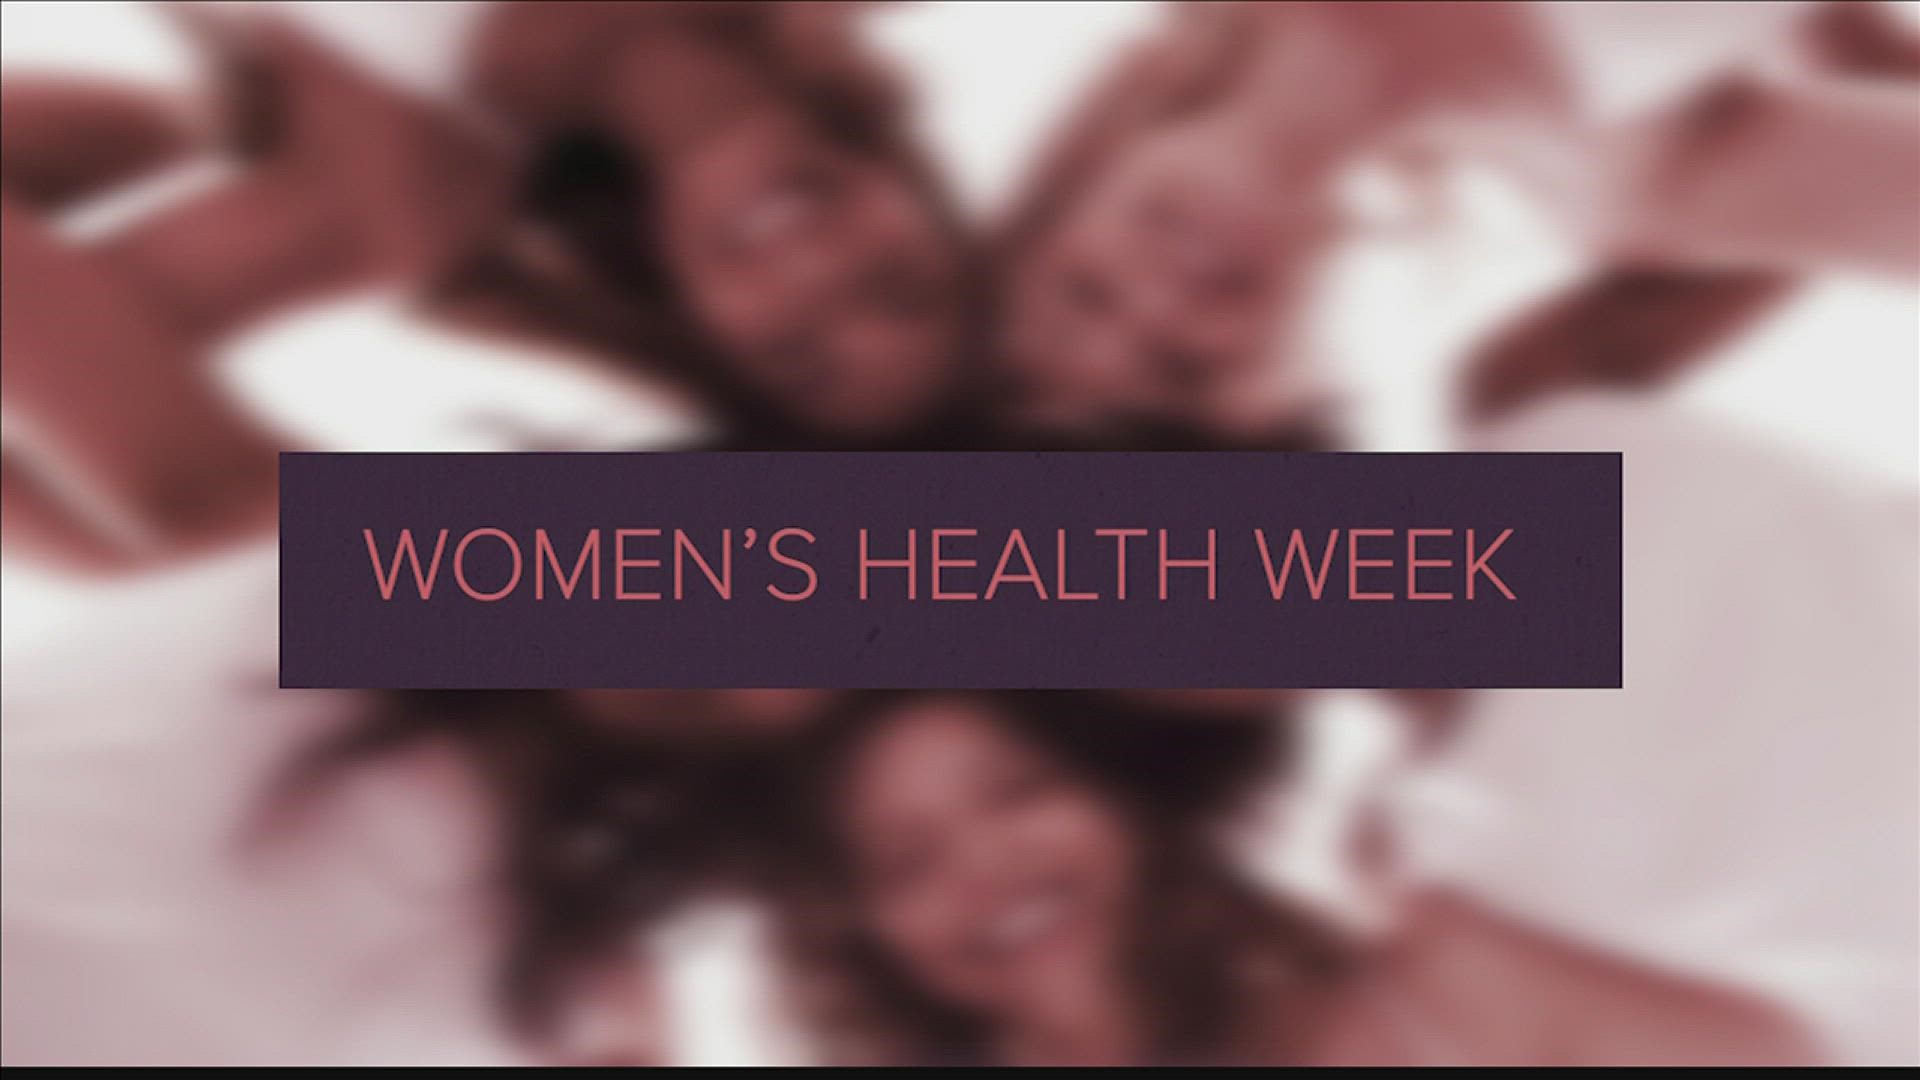 This week is women's health week, and for this week's Wellness Wednesday, it's important you know what services are available right here at Huntsville Hospital.